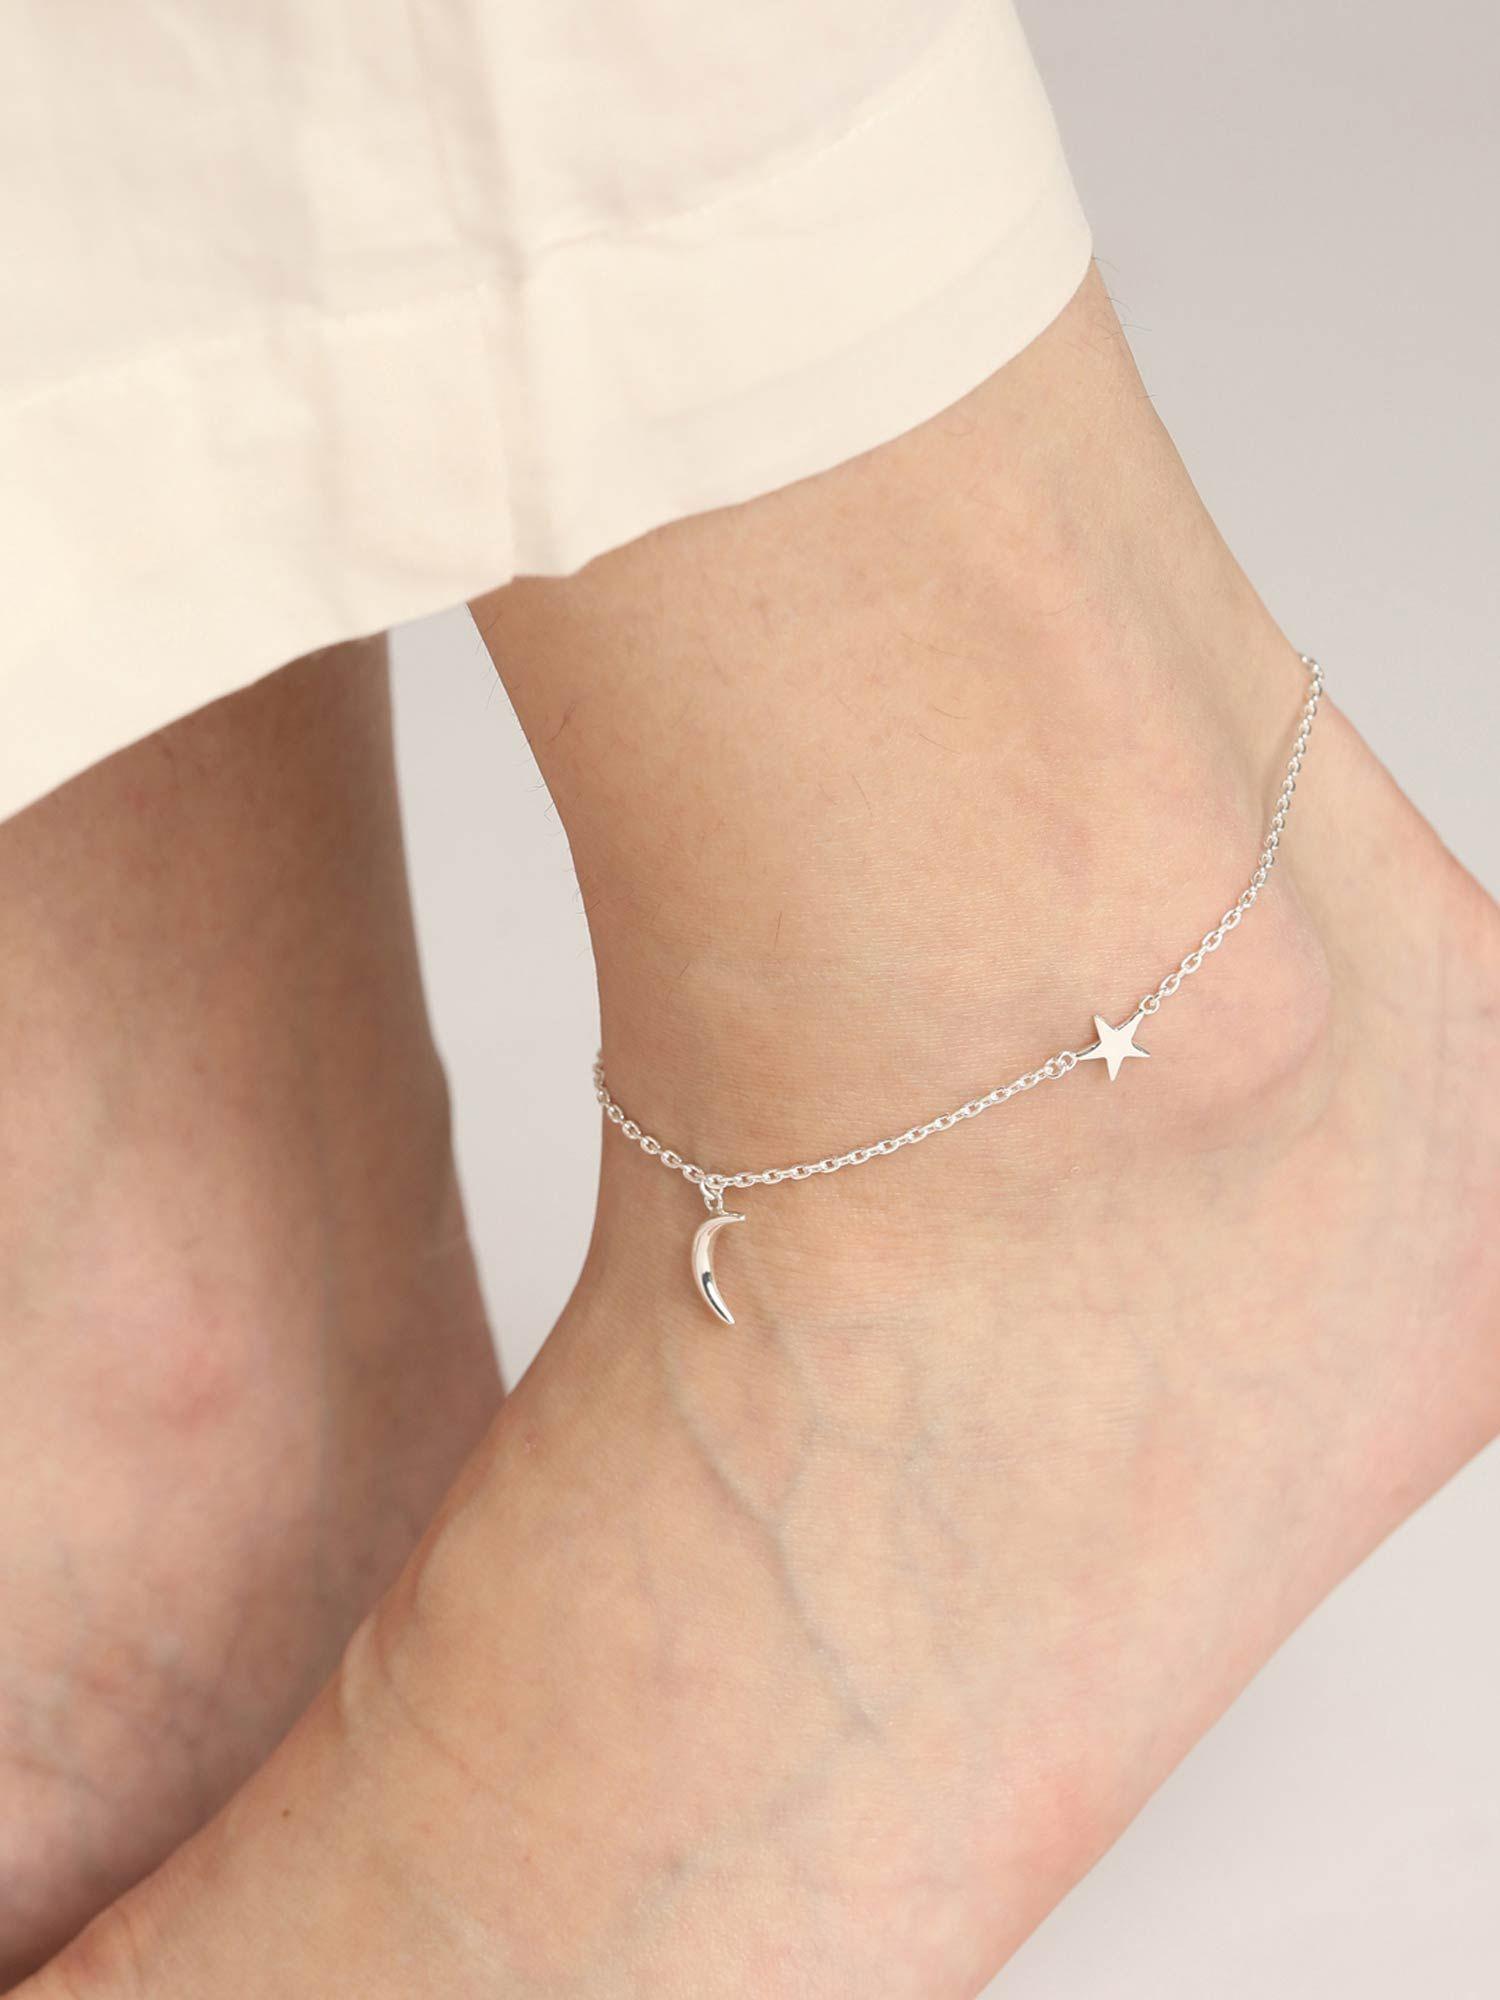 925 sterling silver minimal adjustable chain anklet payal single for women and girls